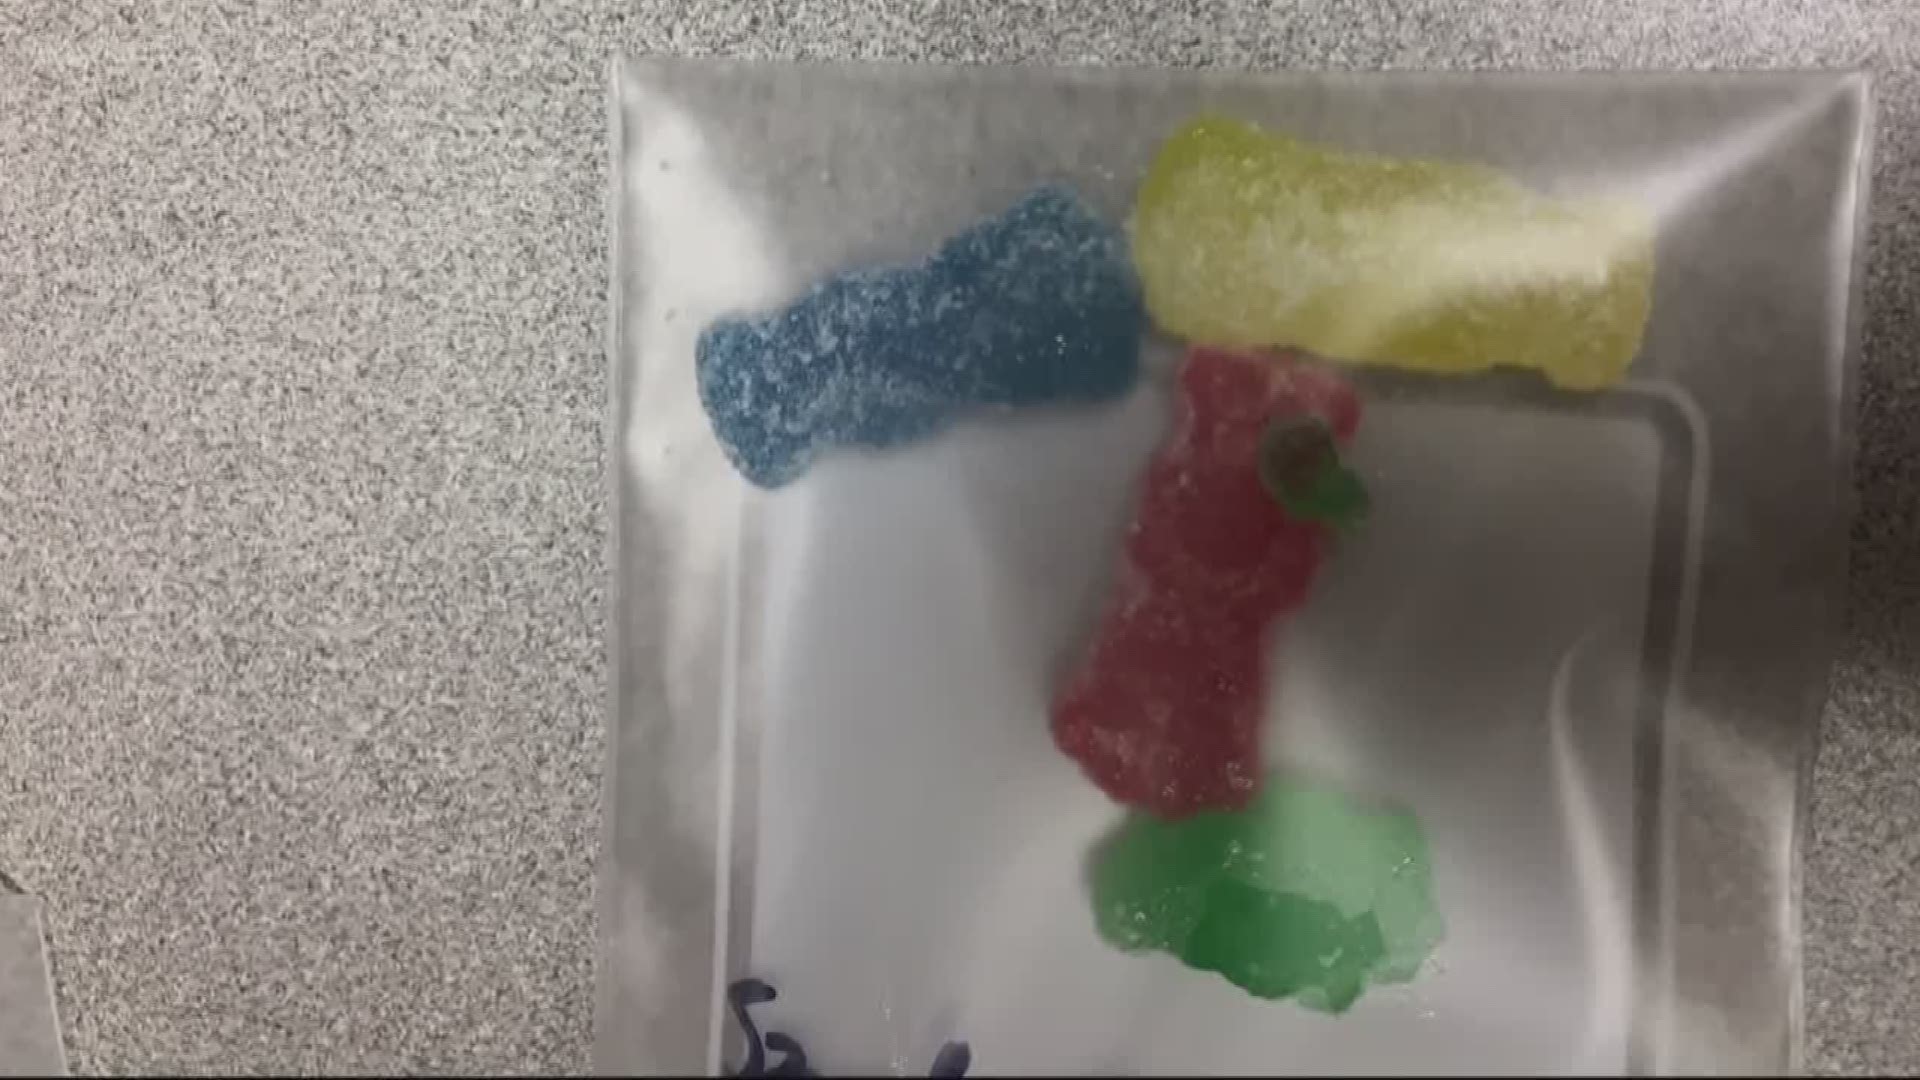 The Aloha parents said they got sick eating Sour Patch Kids candy their children received while trick-or-treating.